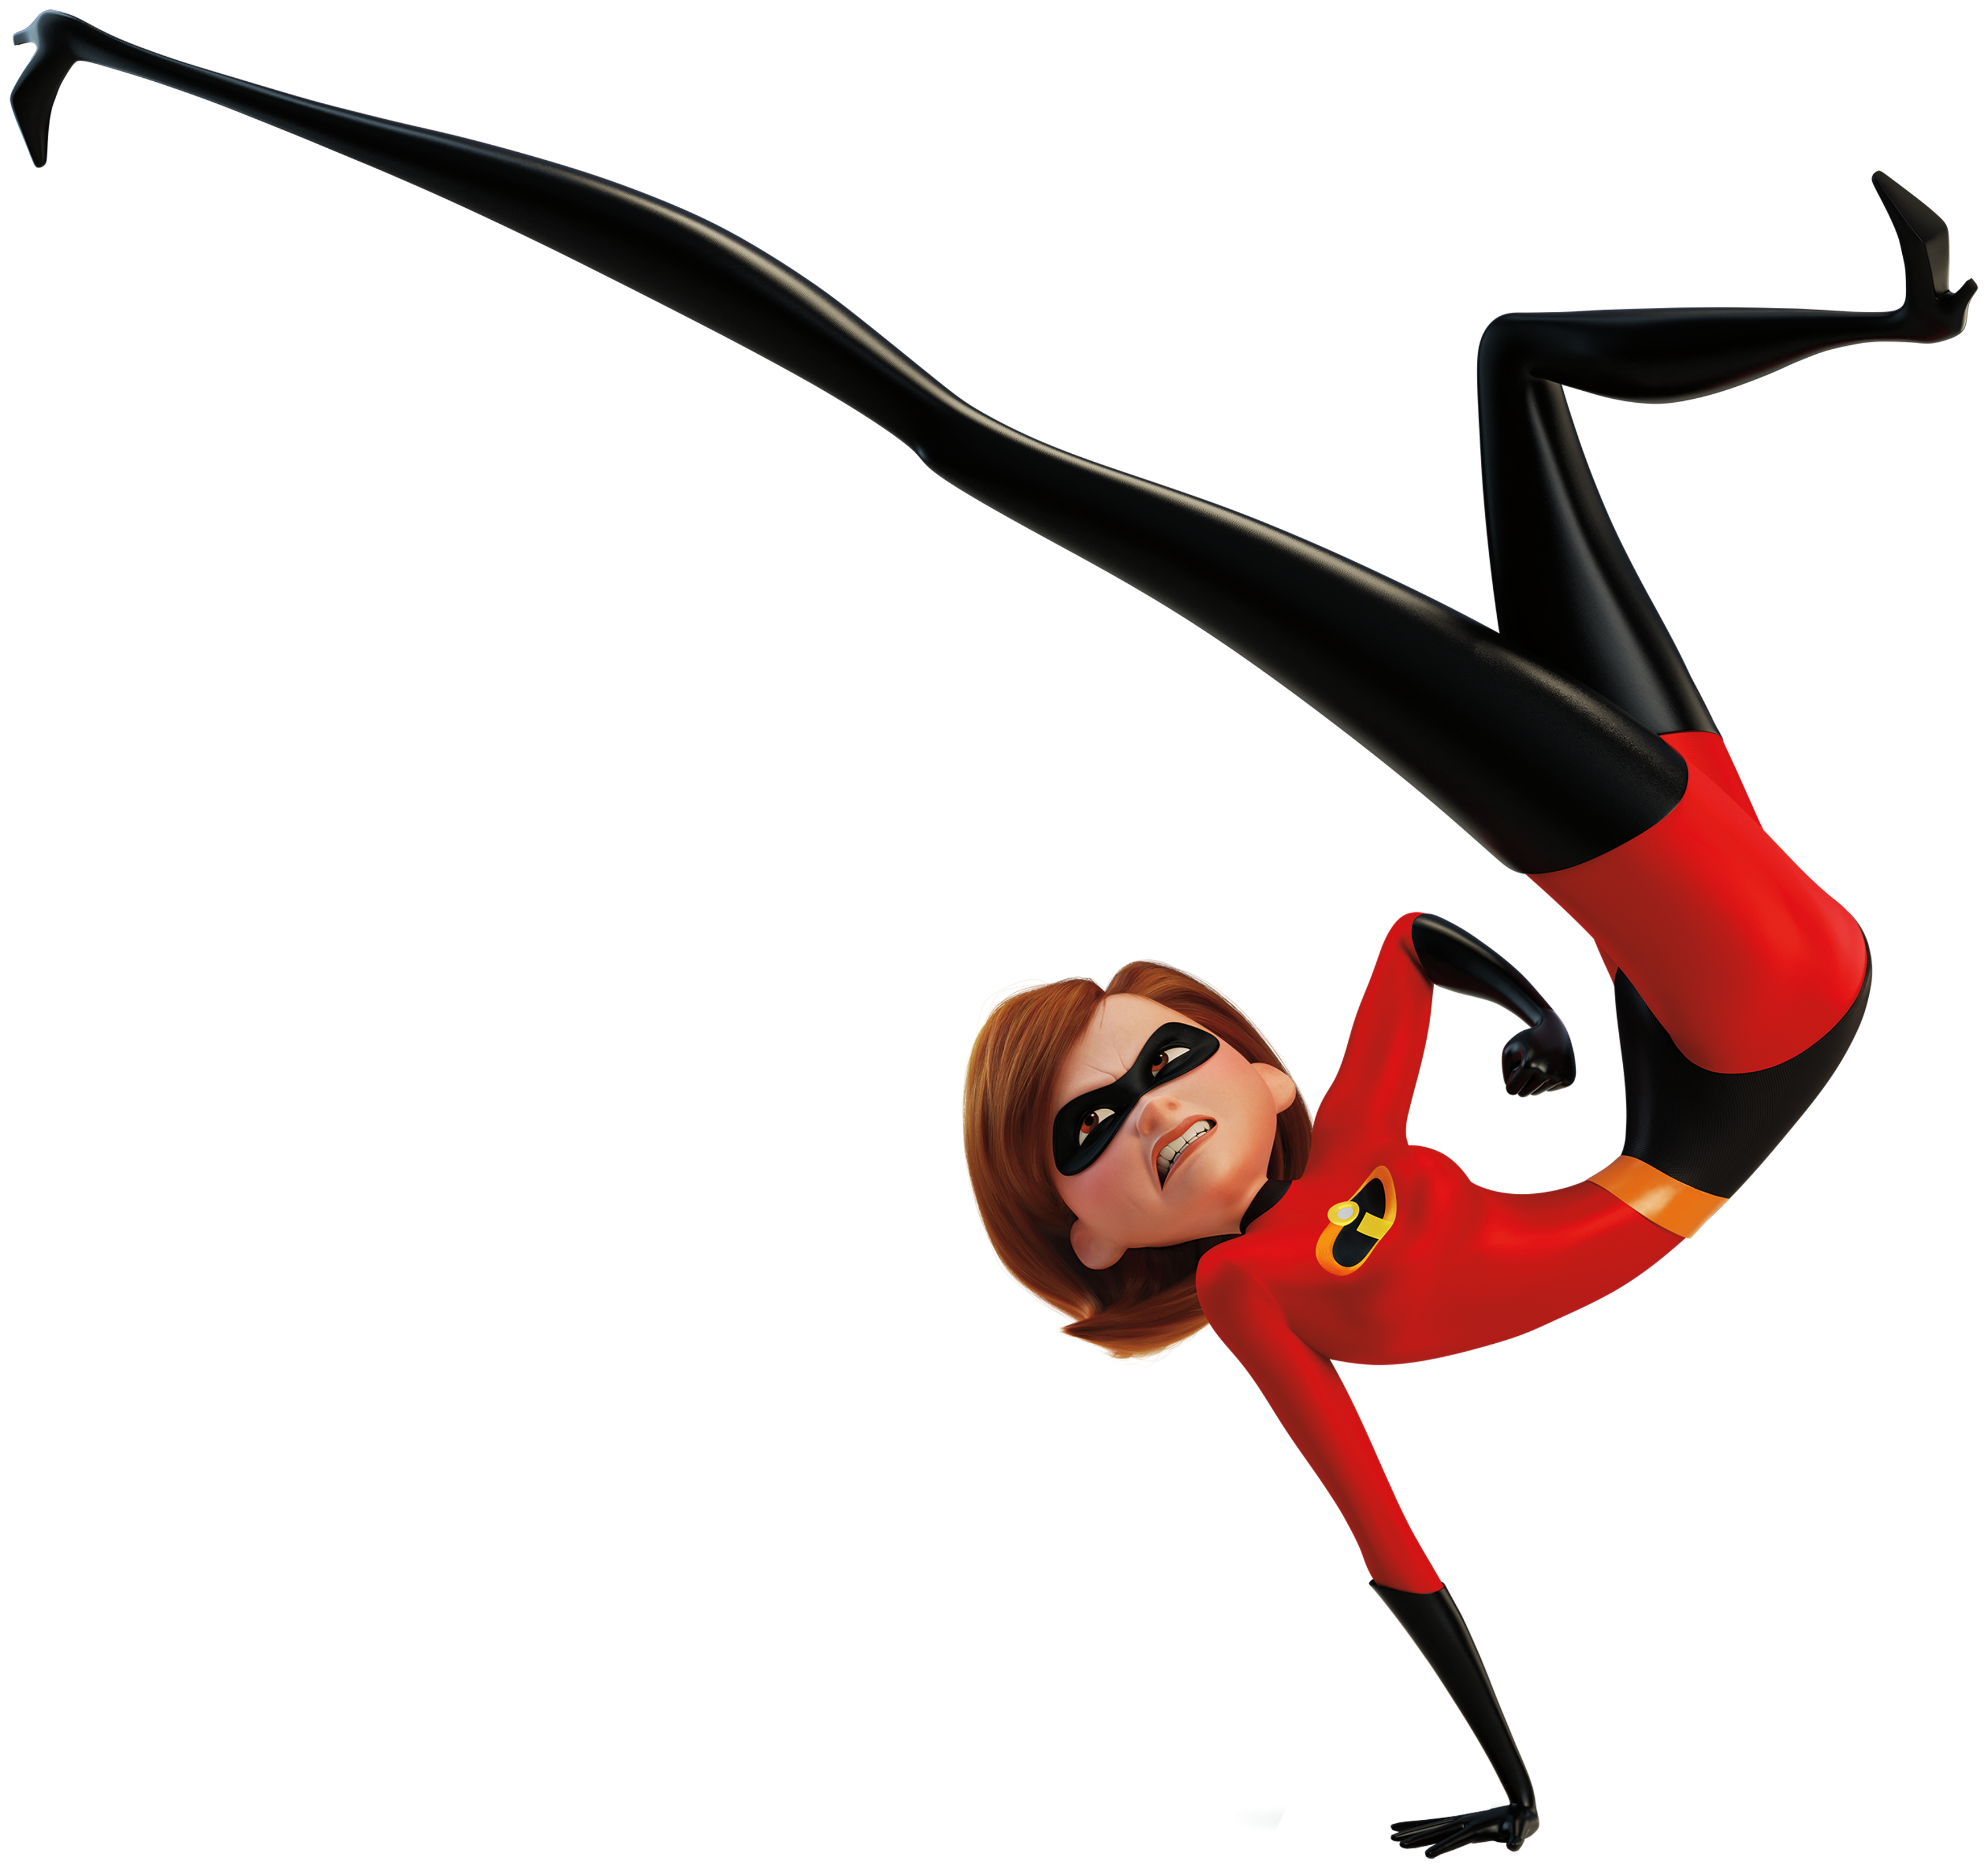 3500x3289 Elastigirl Incredibles 2 Png Cartoon Image High Quality Image And Transparent Png Free Clipart